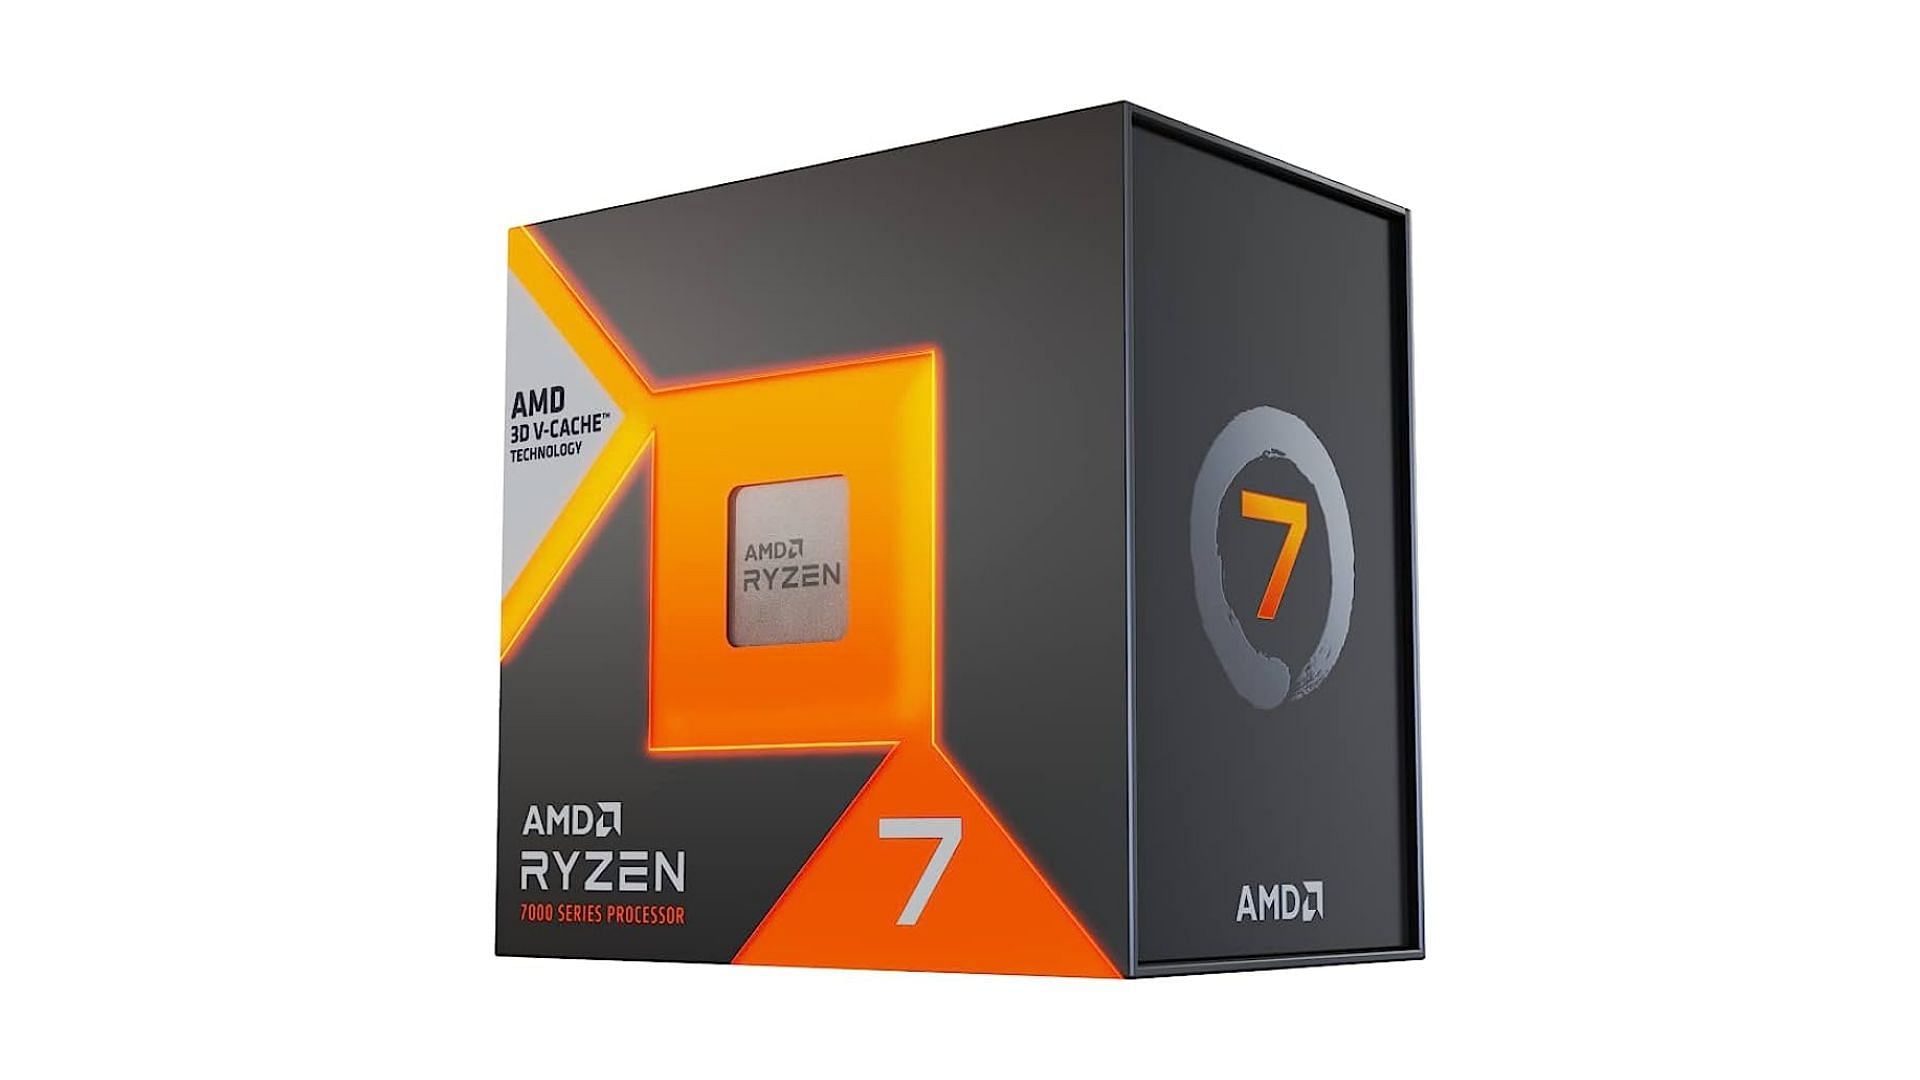 The AMD Ryzen 7 7800X3D has become one of the most popular CPUs. (Image via Amazon)